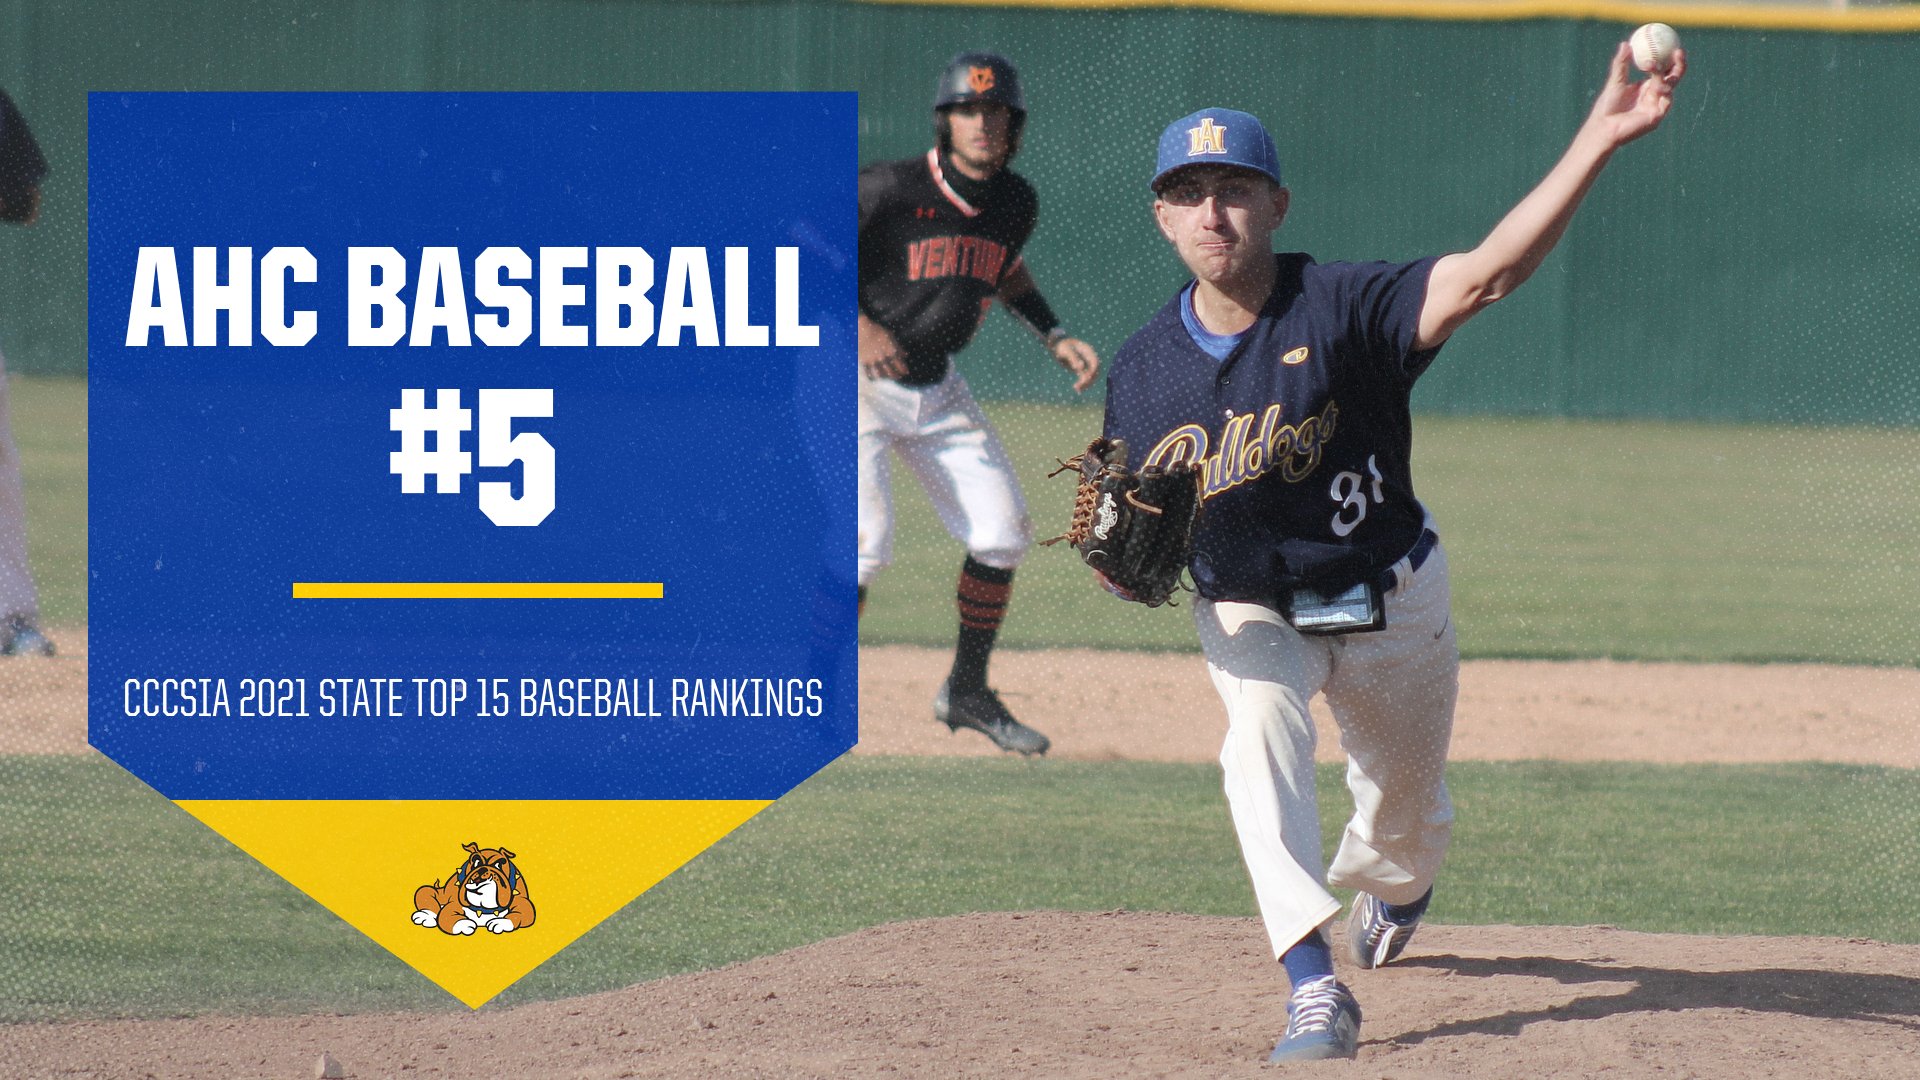 AHC Baseball Ranked Fifth in CCCSIA Top 15 Poll